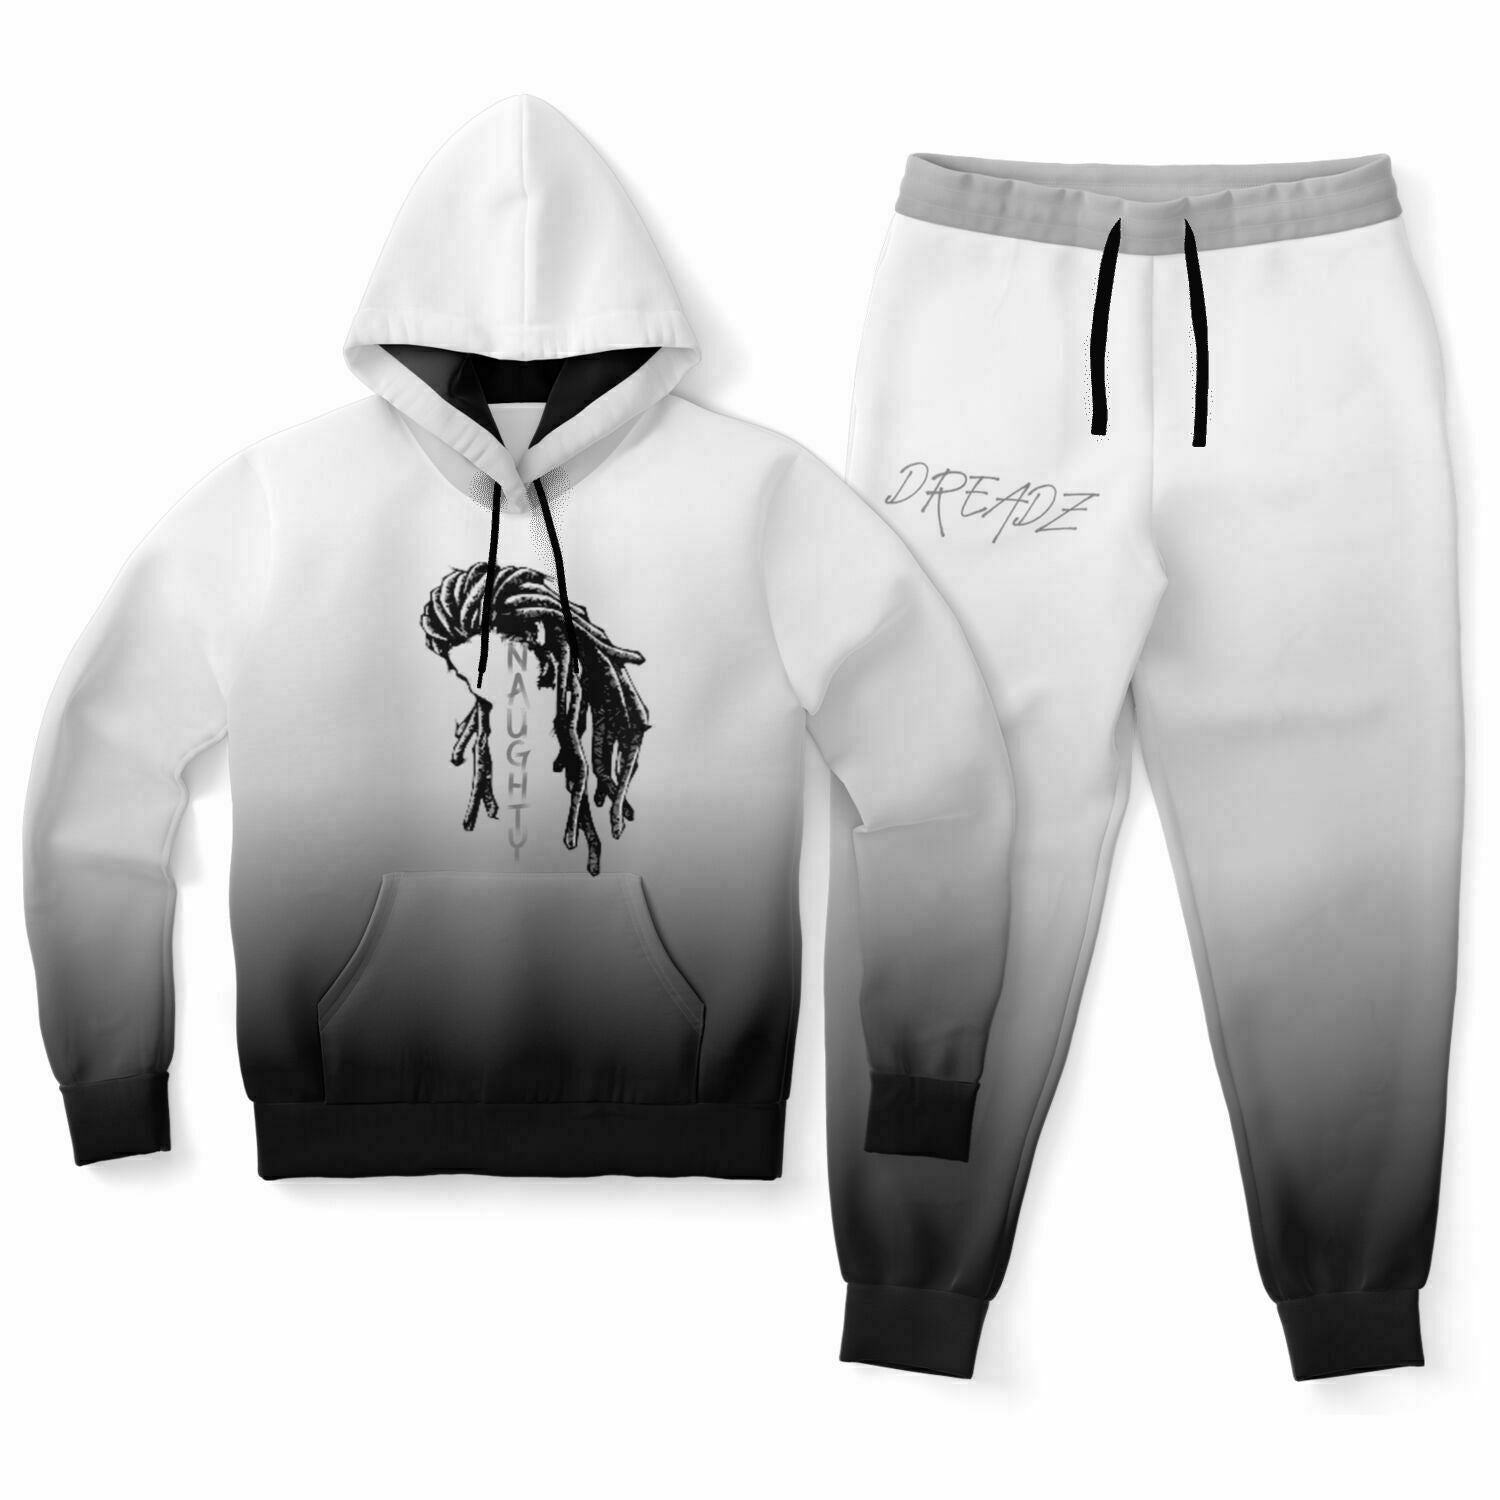 Comfy Naughty Dreadz Premium Hoodie & Jogger - Fashion Hoodie & Jogger - AOP at TFC&H Co.